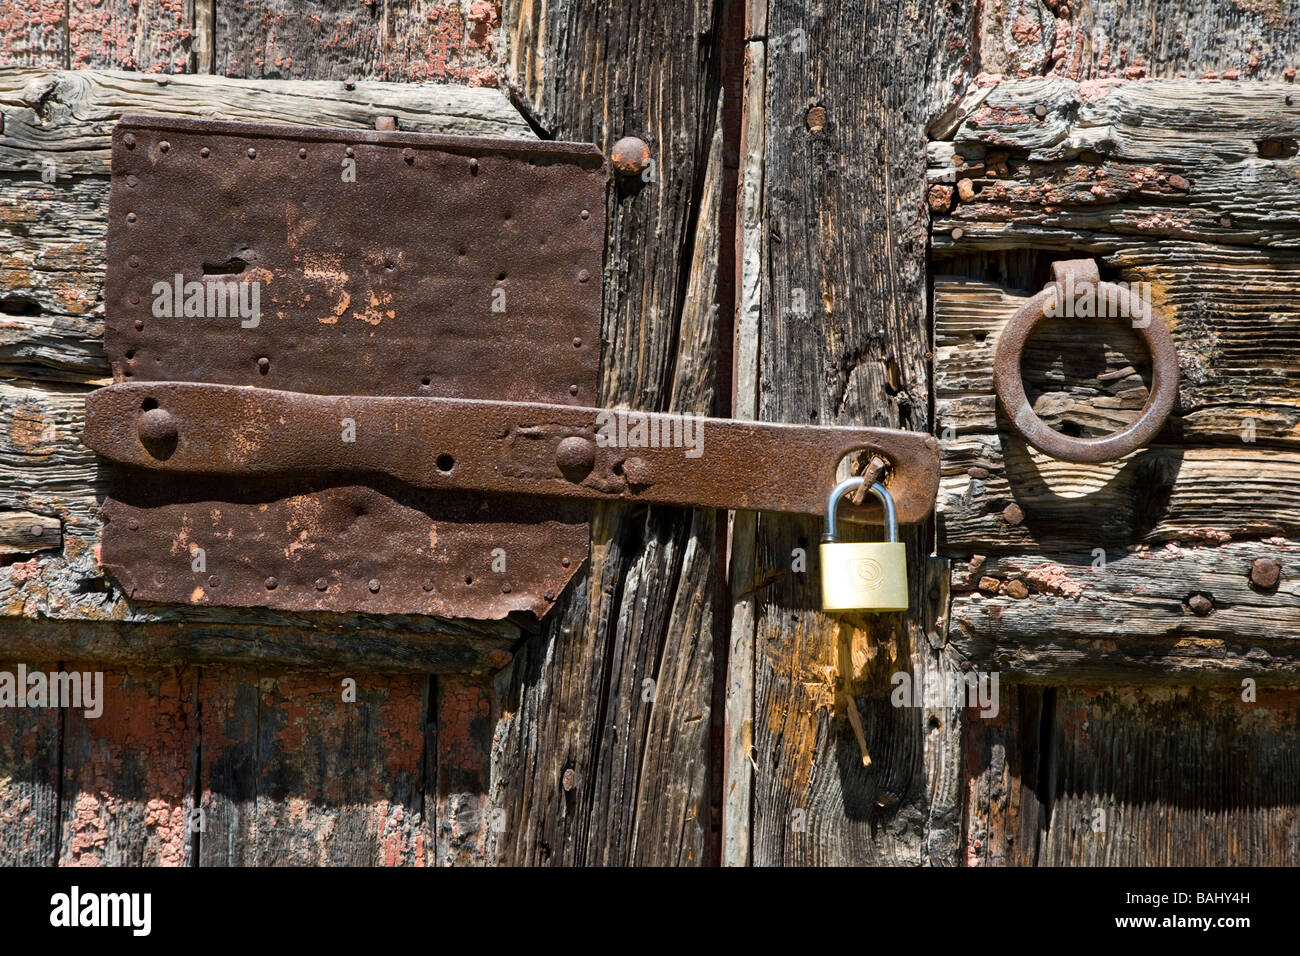 A rusting hasp & staple on a crumbling door in Linari, Tuscany, Italy Stock Photo